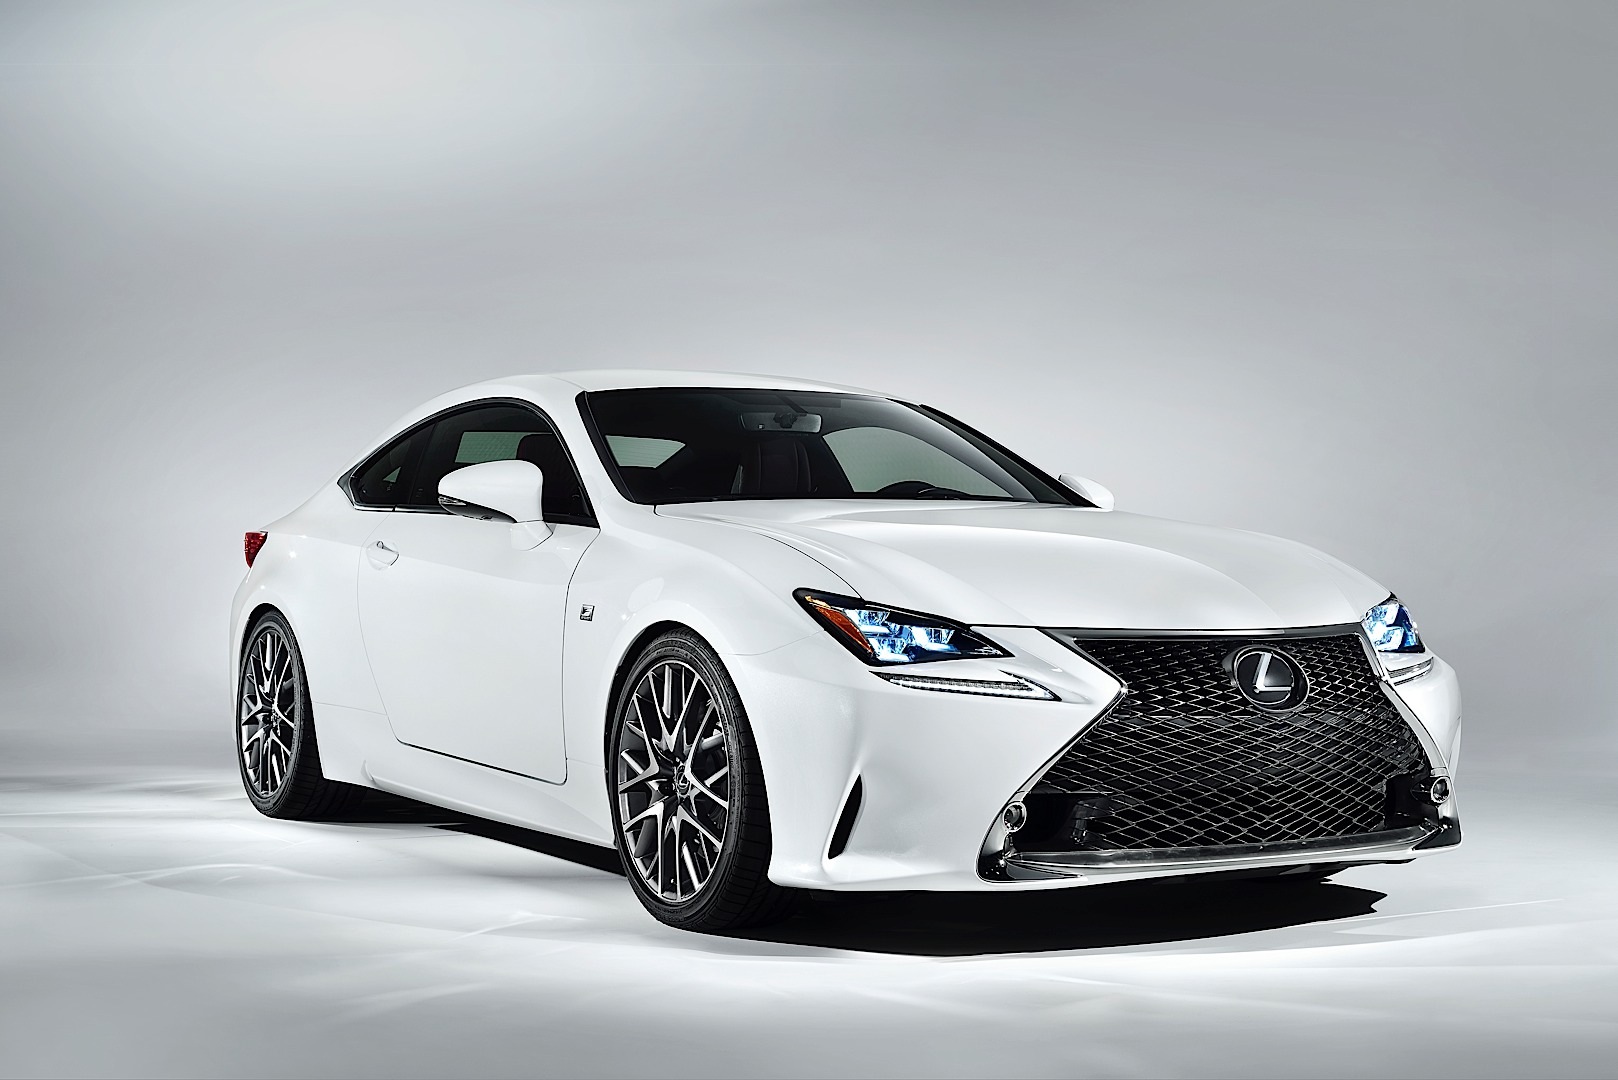 2015 Lexus RC, RC F: Your Sexy HD Wallpapers Are Here - autoevolution